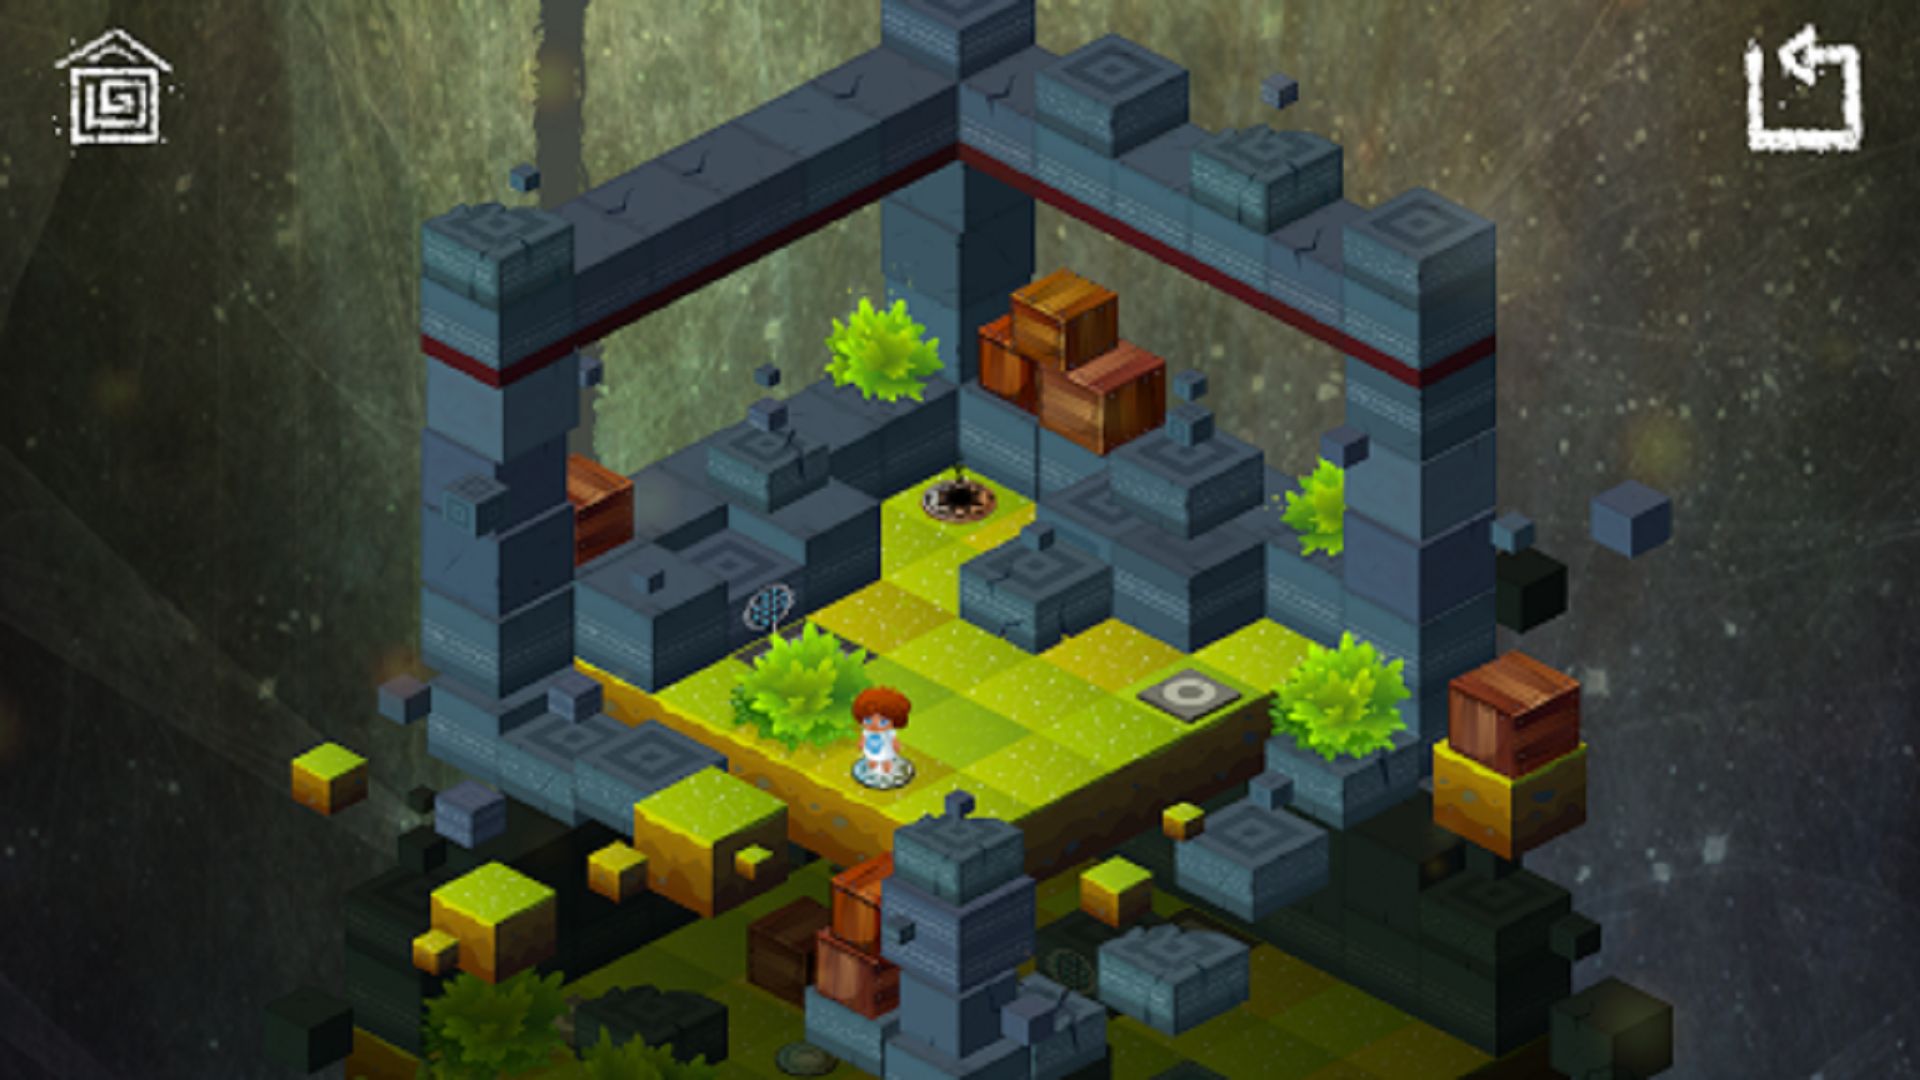 Download Persephone - A Puzzle Game für Android kostenlos.